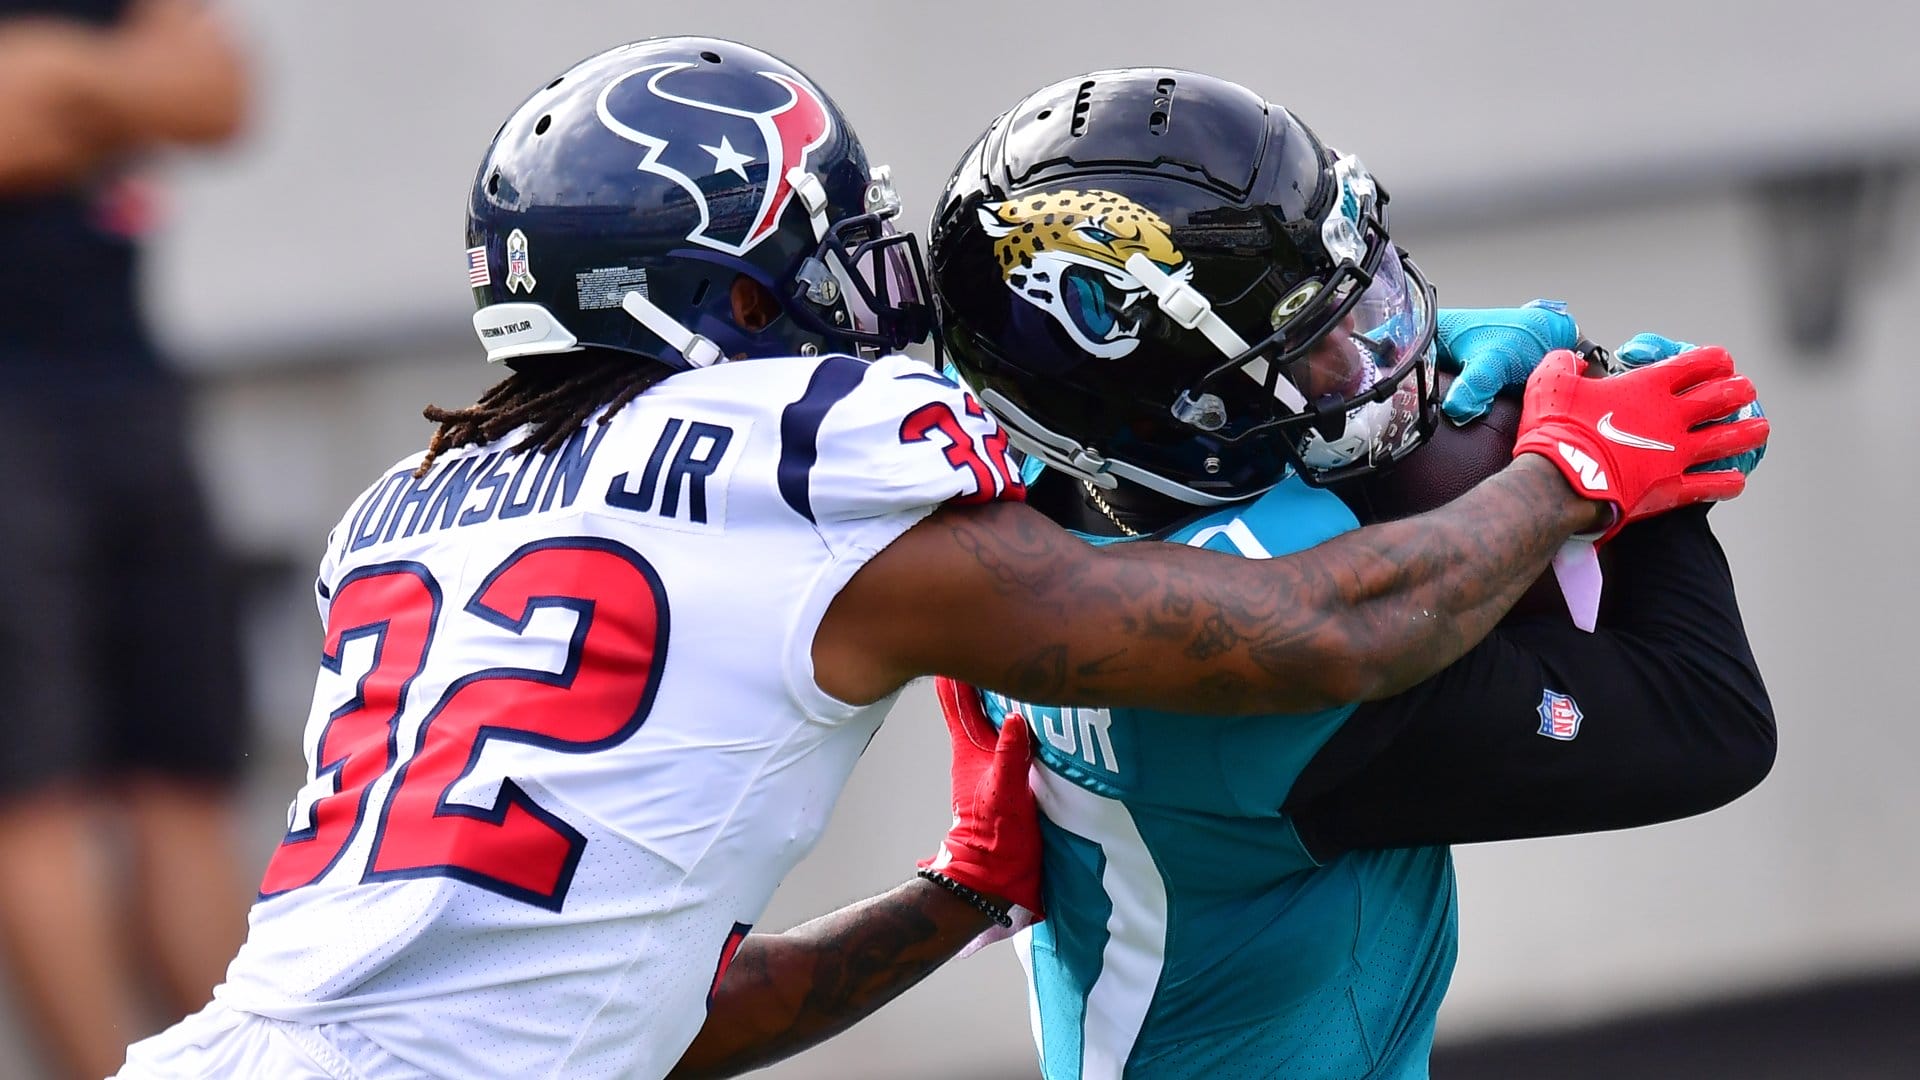 JACKSONVILLE, FLORIDA - NOVEMBER 08: D.J. Chark #17 of the Jacksonville Jaguars scores a touchdown in front of Lonnie Johnson #32 of the Houston Texans during the first quarter of a game at TIAA Bank Field on November 08, 2020 in Jacksonville, Florida. (Photo by Julio Aguilar/Getty Images)